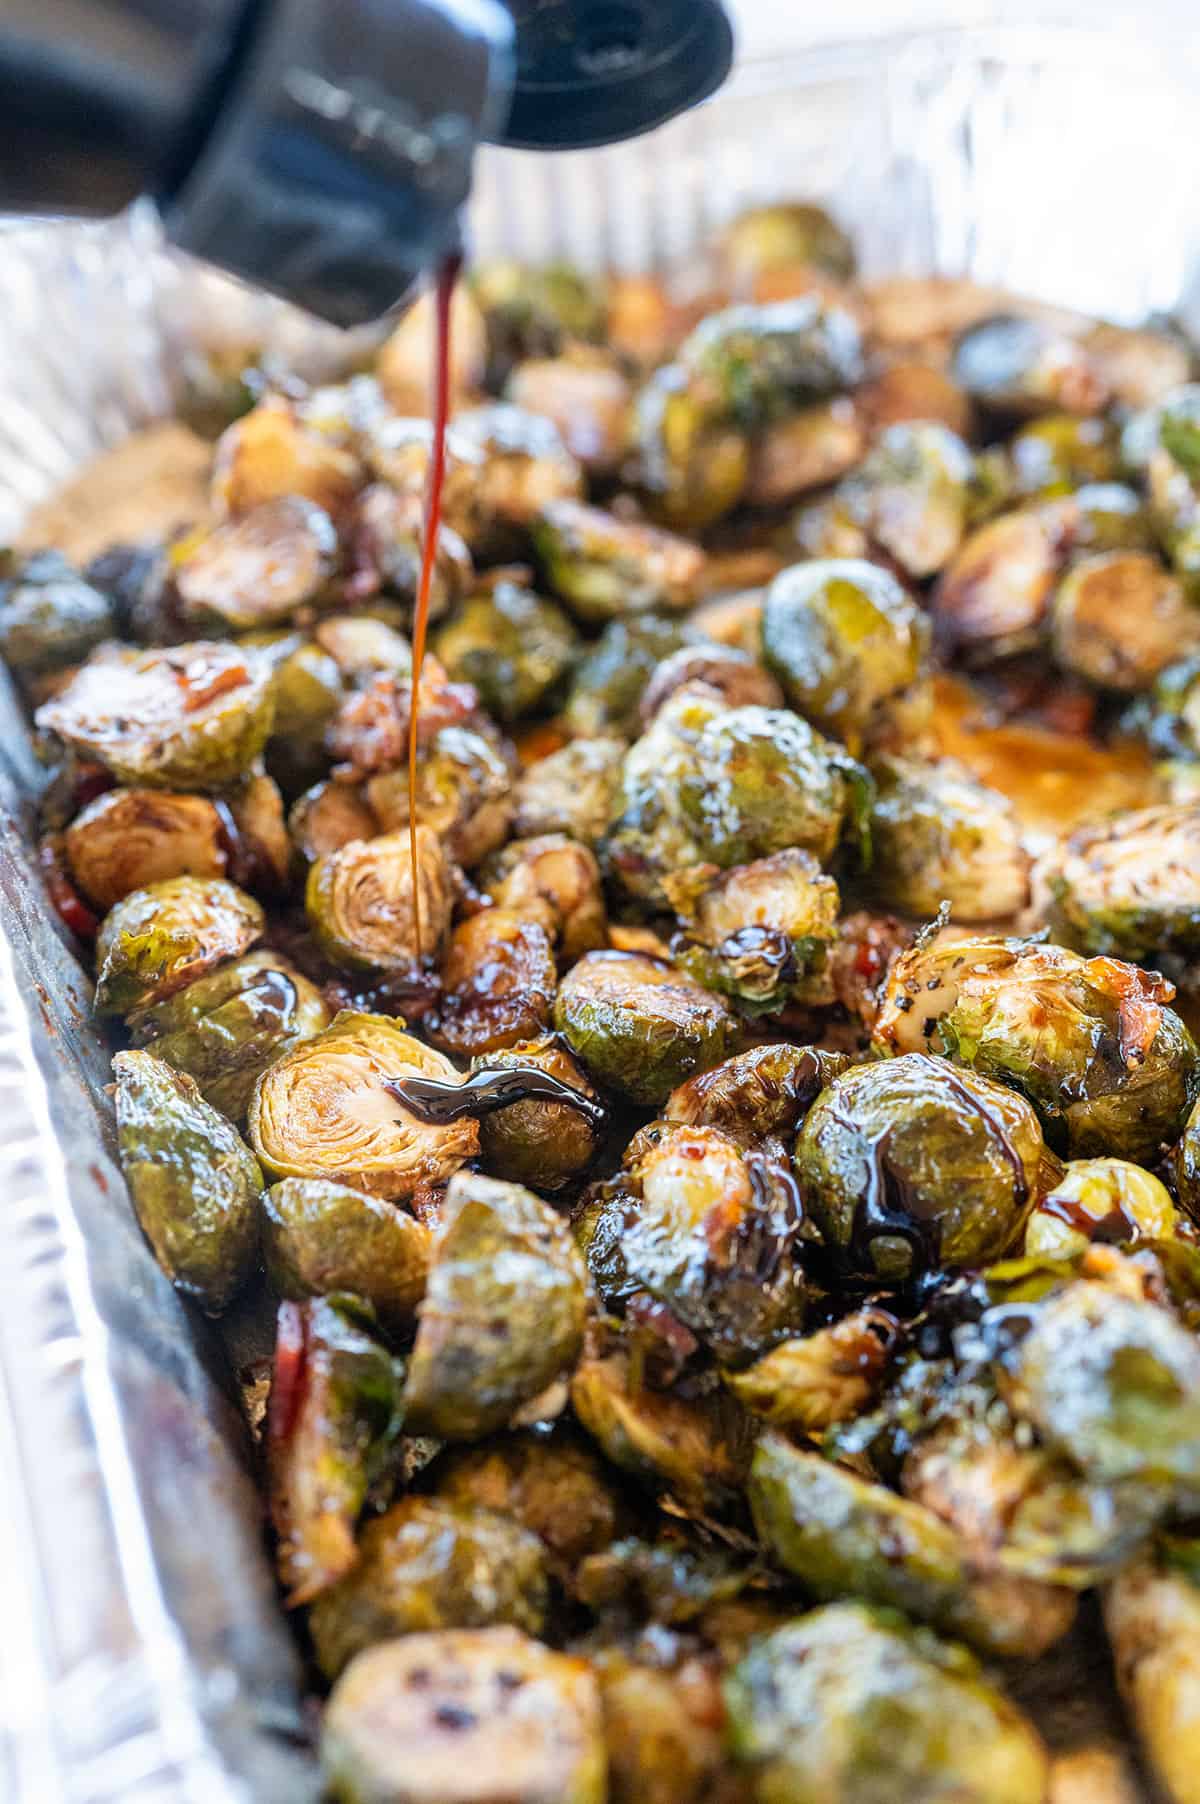 drizzling balsamic glaze on brussels sprouts.